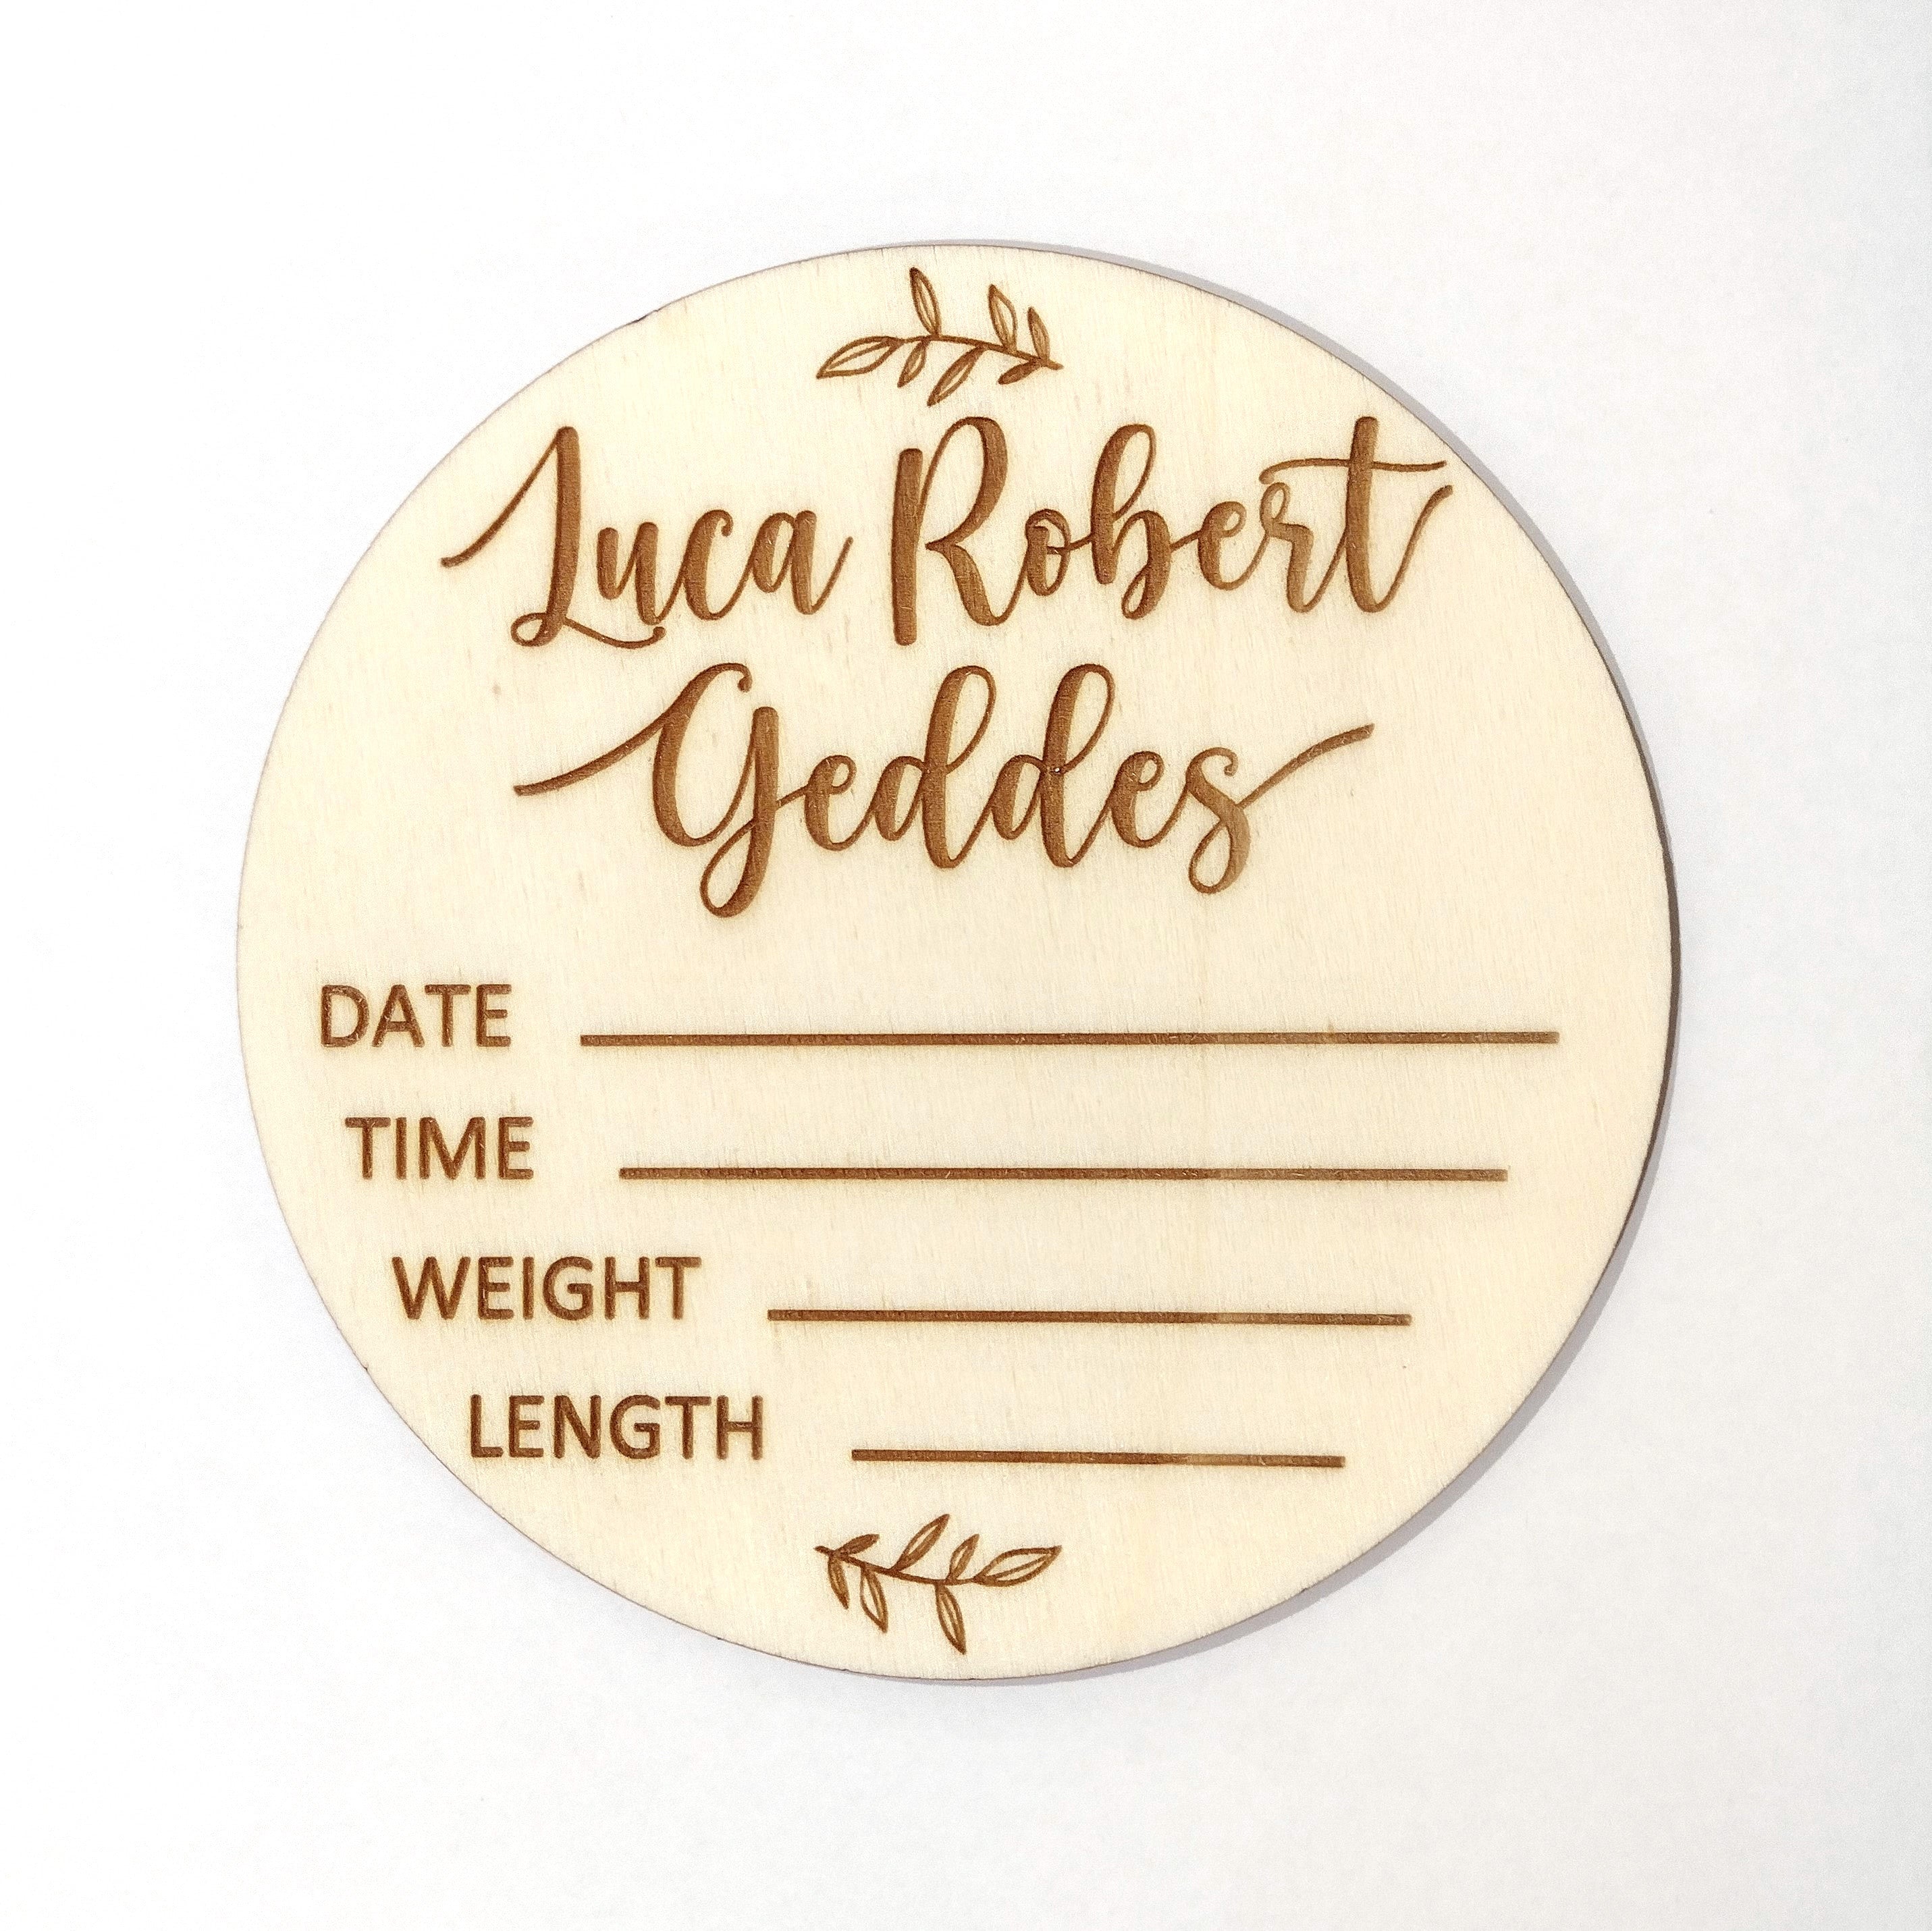 New Born Announcement / Introducing + Baby Name Disc Double Sided